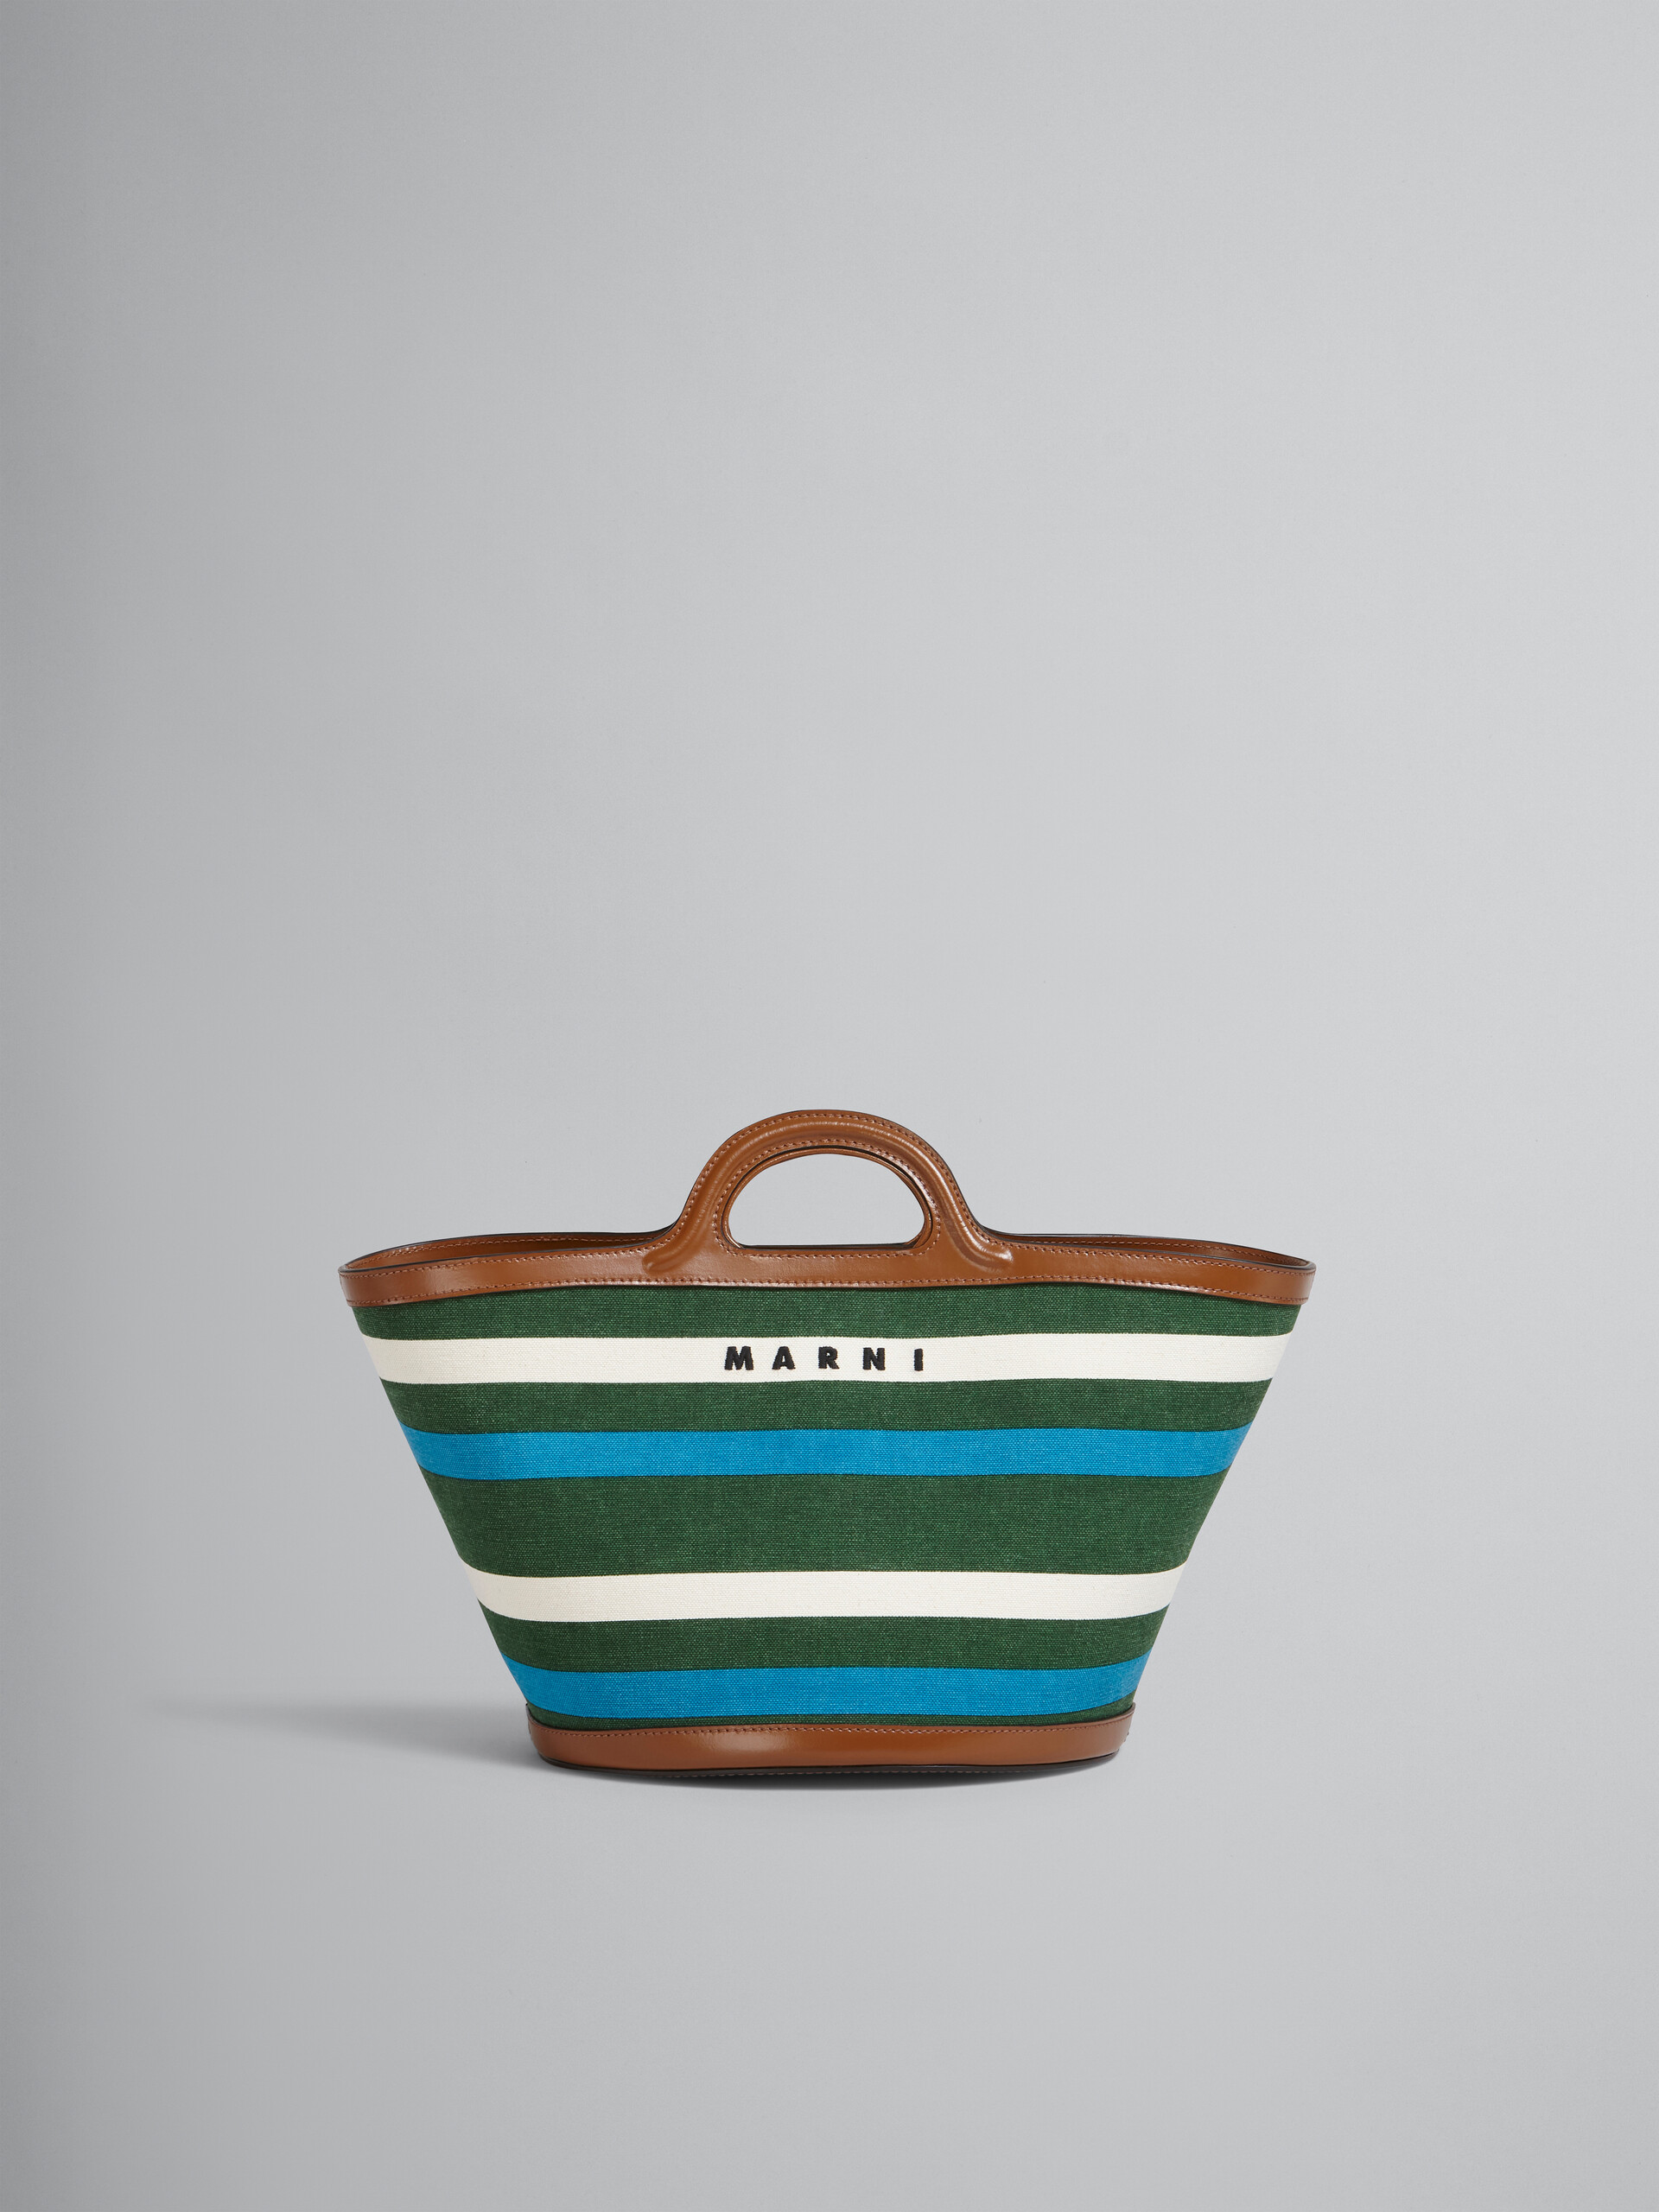 TROPICALIA small bag in leather and striped canvas - Handbag - Image 1